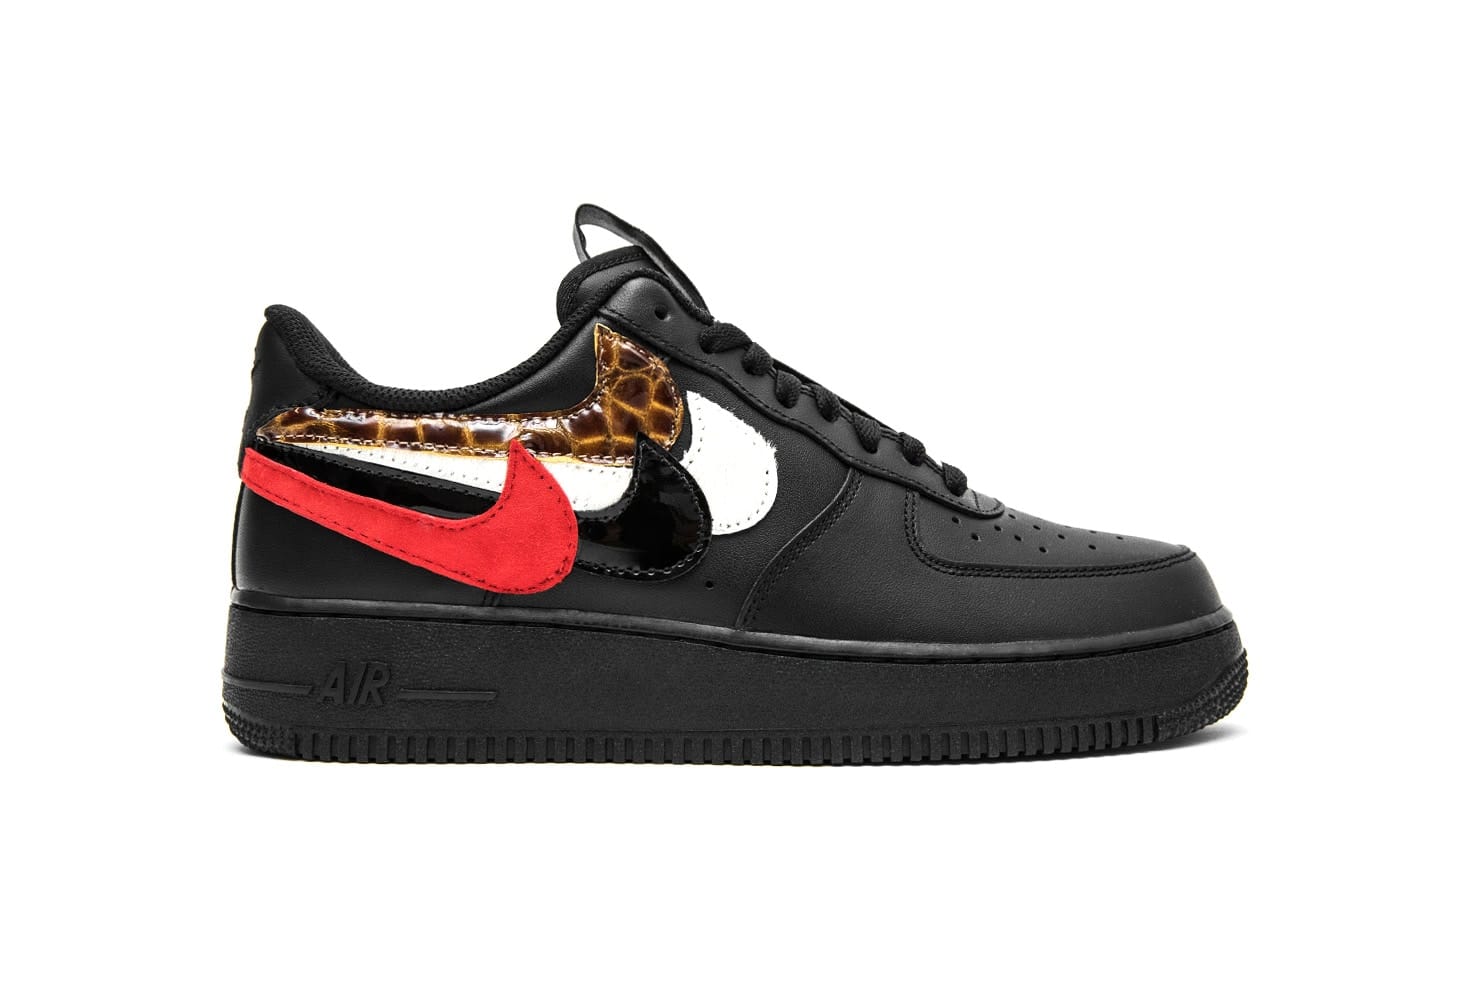 Air Force 1 “Misplaced Checks 